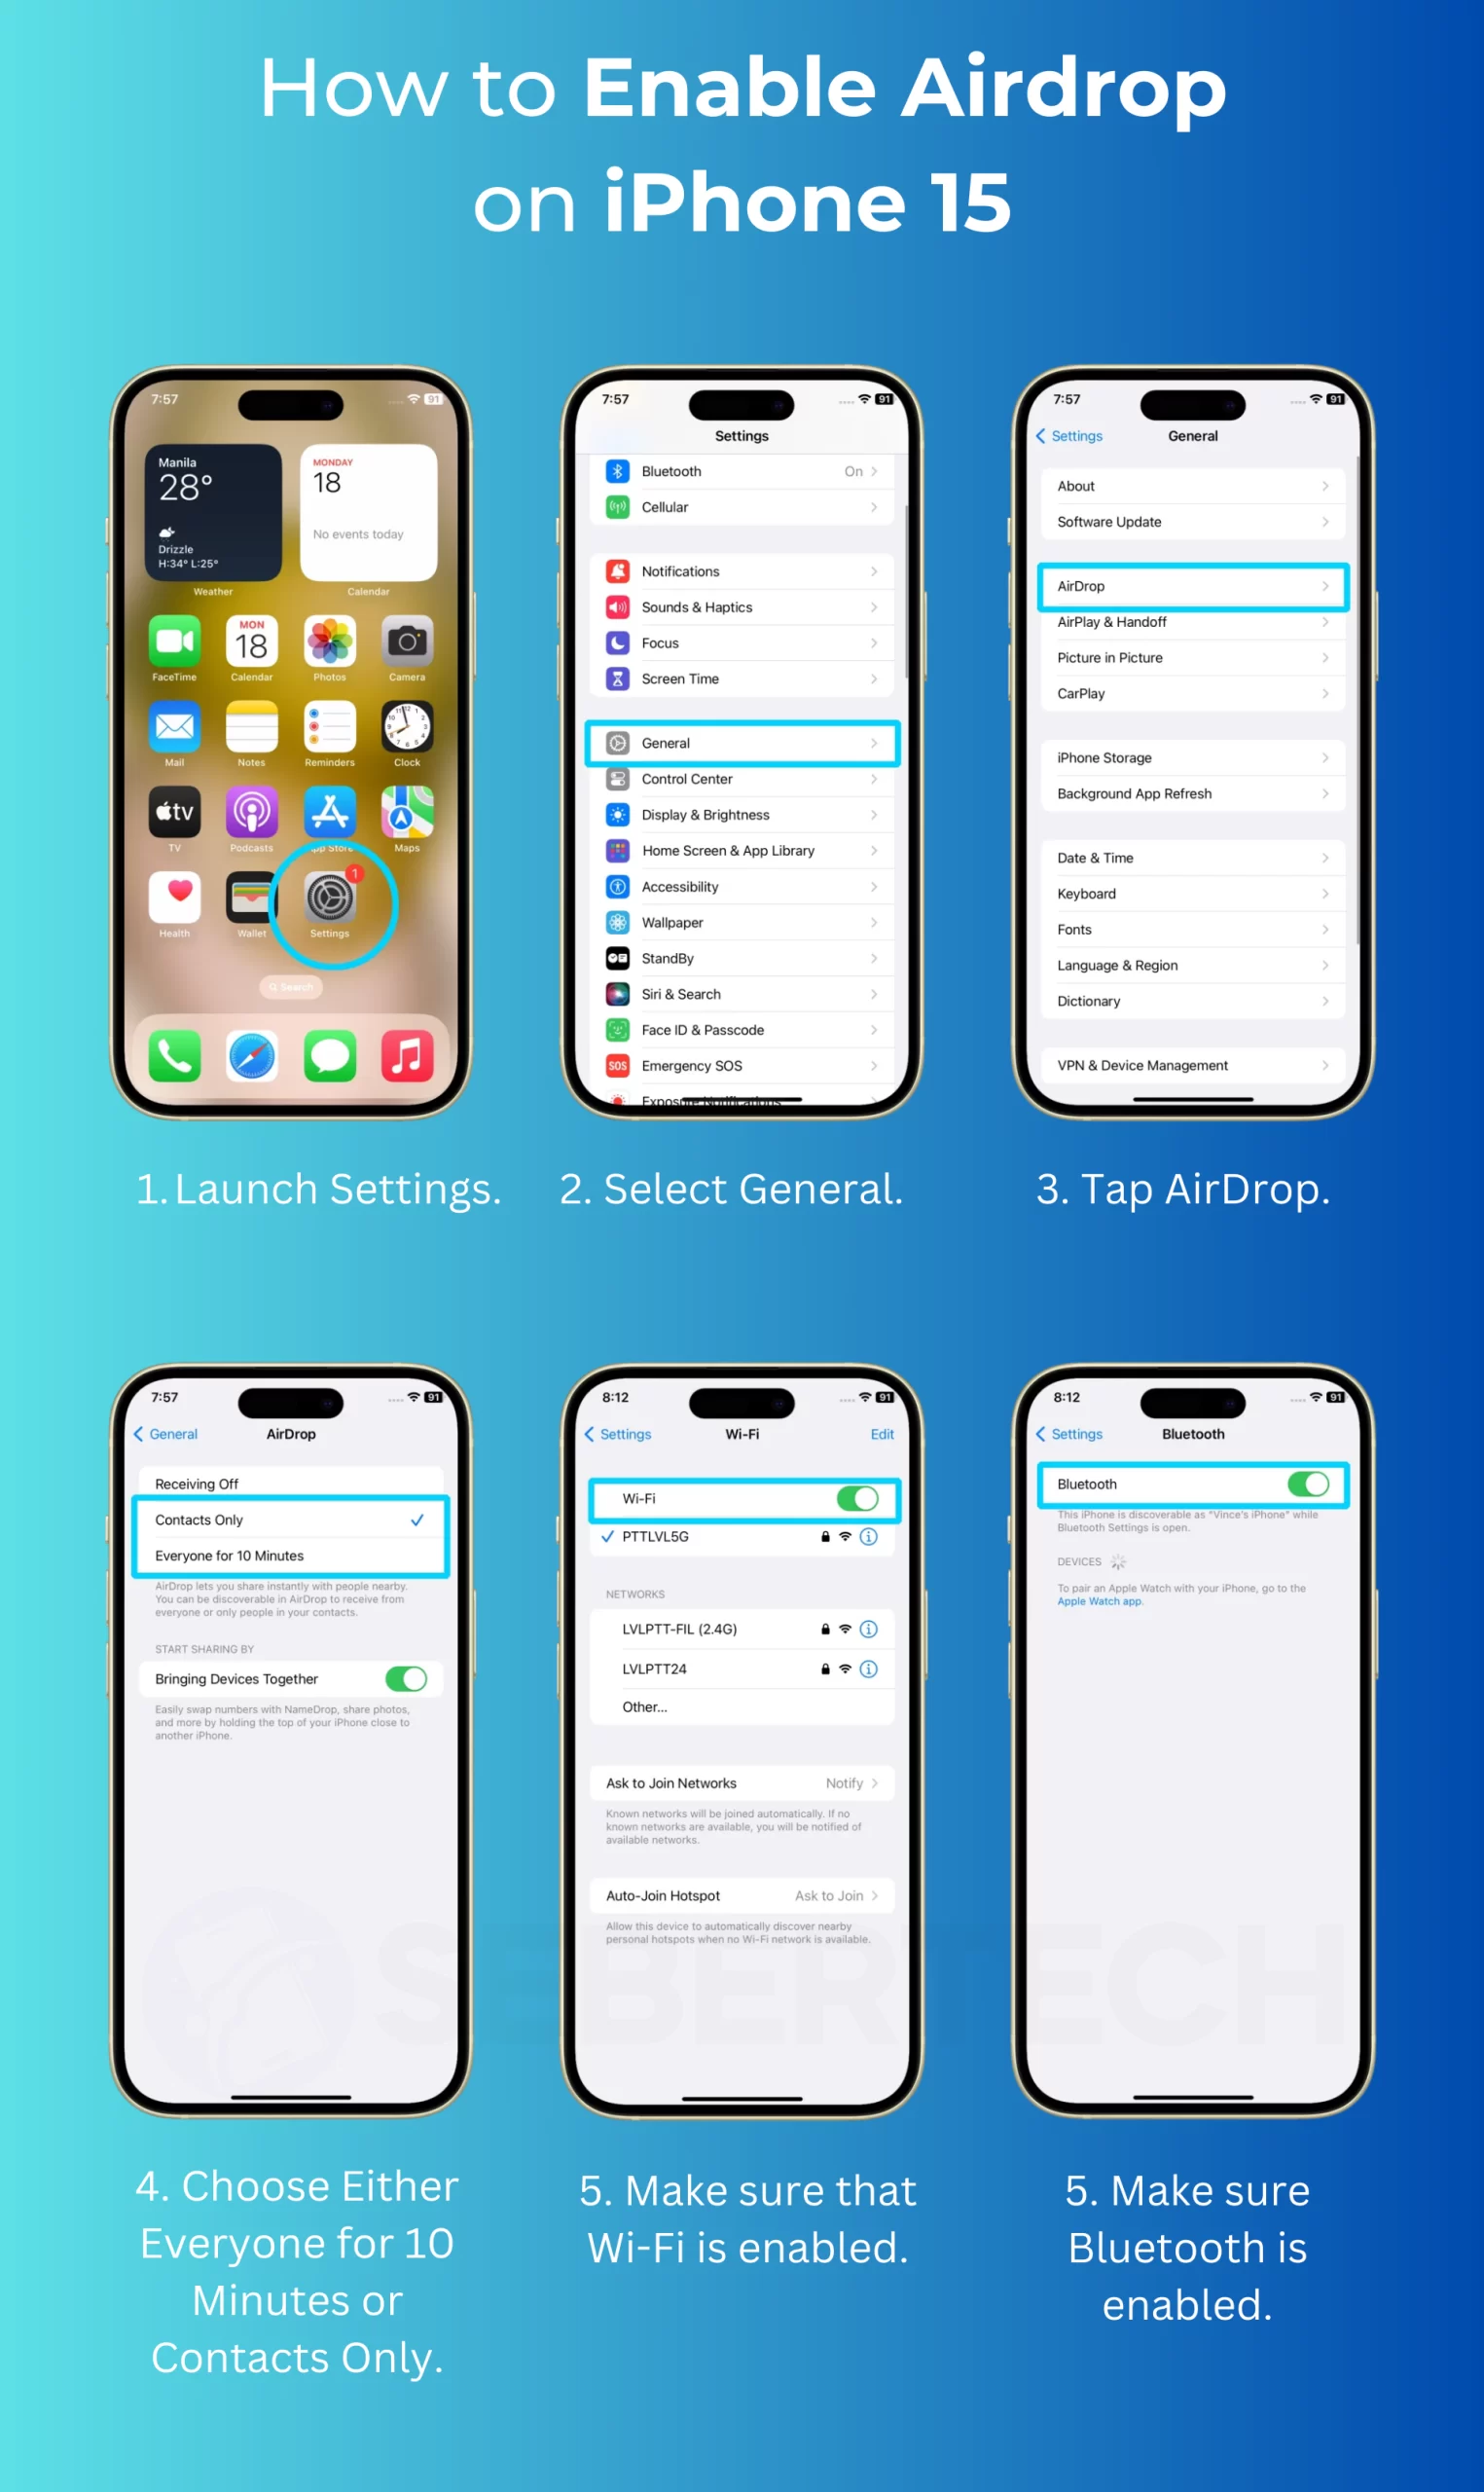 The iPhone 15 has not been released yet, so there is no way to say for sure how to enable AirDrop on it. However, based on previous iPhone models, it is likely that you will be able to enable AirDrop by following these steps:

Open the Control Center.

Tap and hold the Airplane Mode, Wi-Fi, and Bluetooth buttons.

Tap the AirDrop button.

Select who you want to be able to receive AirDrops from:

Contacts Only: Only people in your Contacts app will be able to send you AirDrops.
Everyone: Anyone who is nearby will be able to send you AirDrops.
Once you have selected your AirDrop settings, you can close the Control Center.